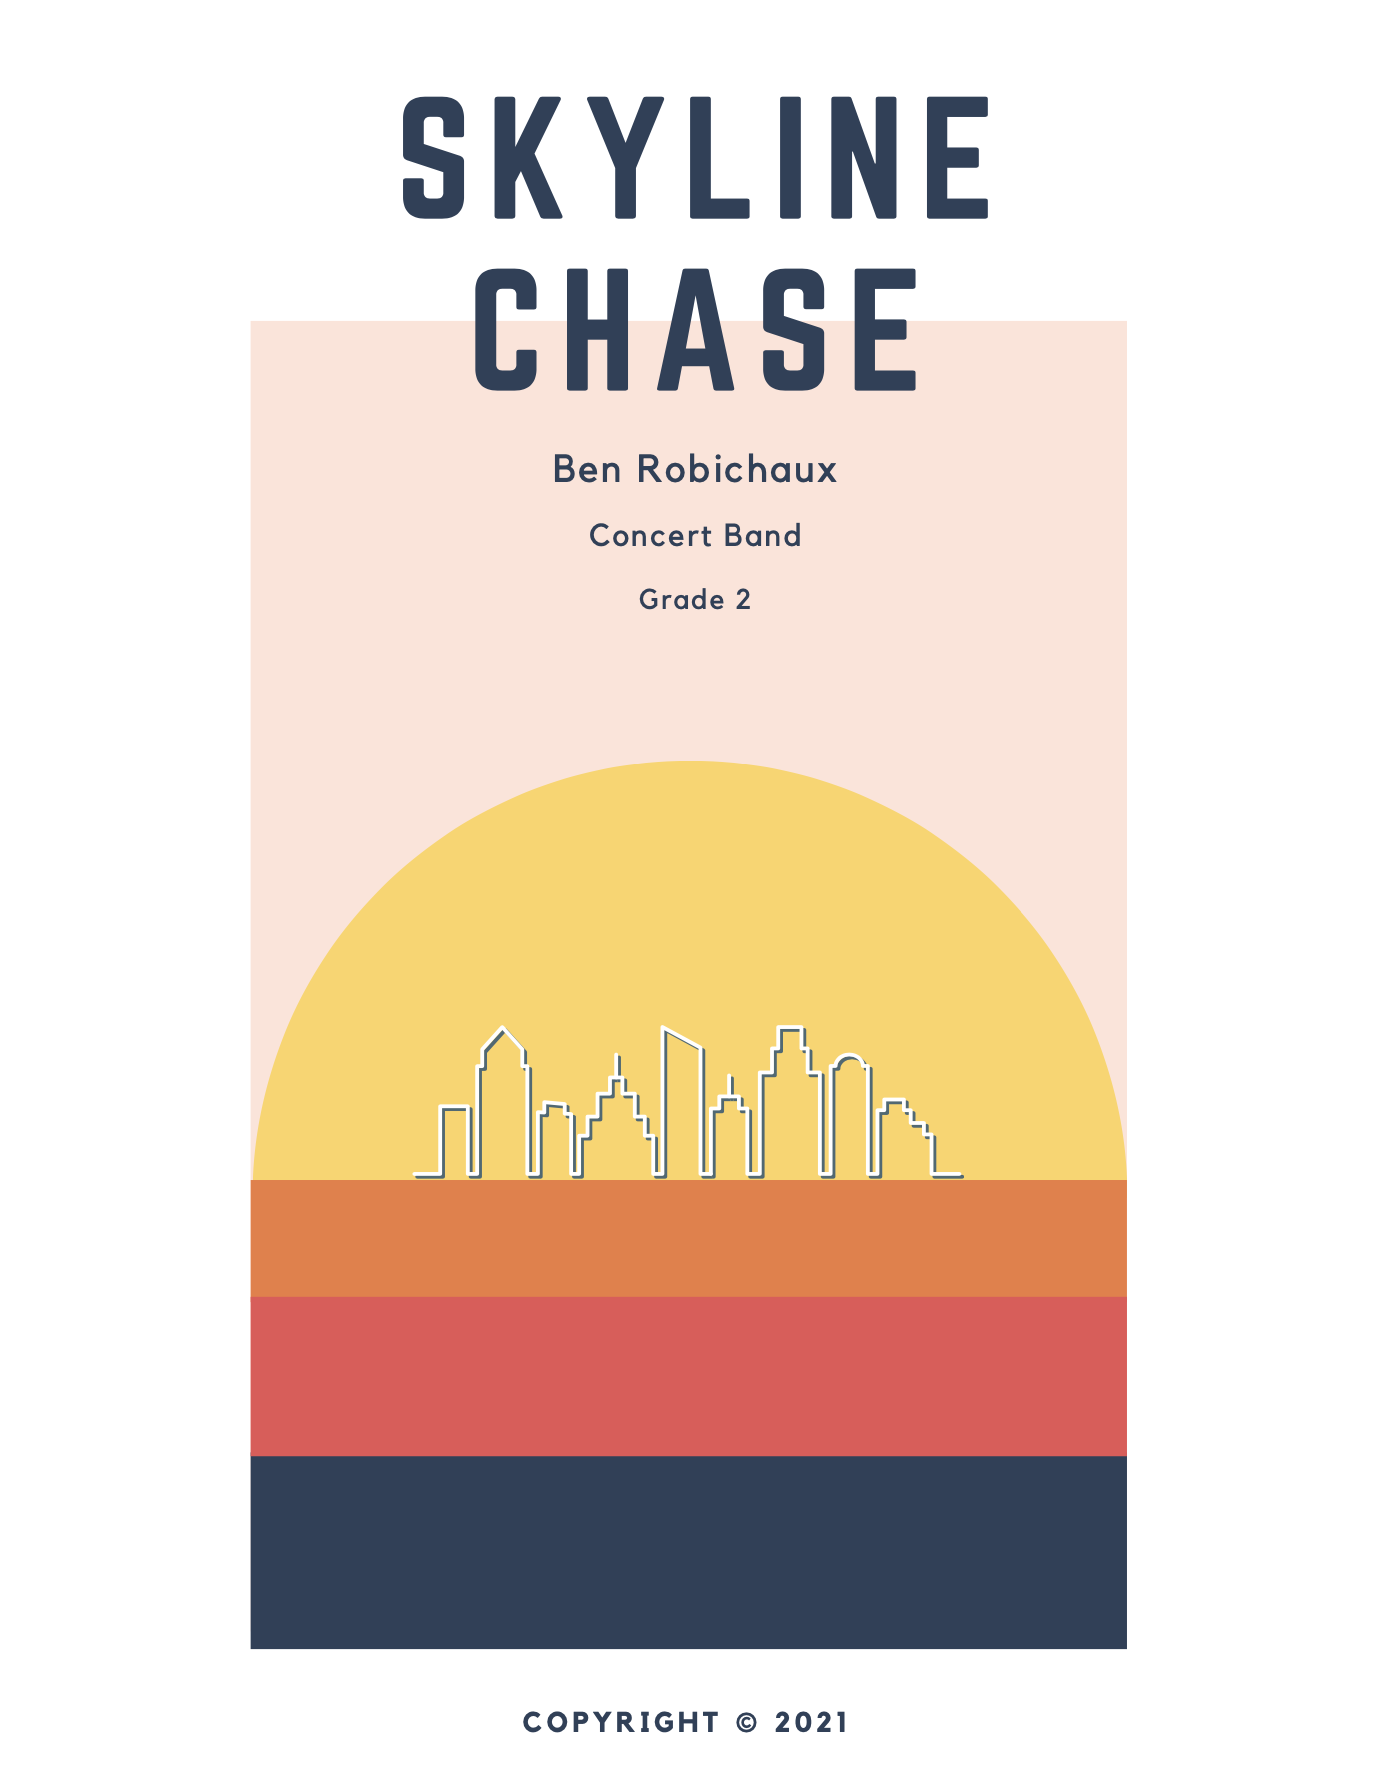 Skyline Chase (Score Only) by Ben Robichaux